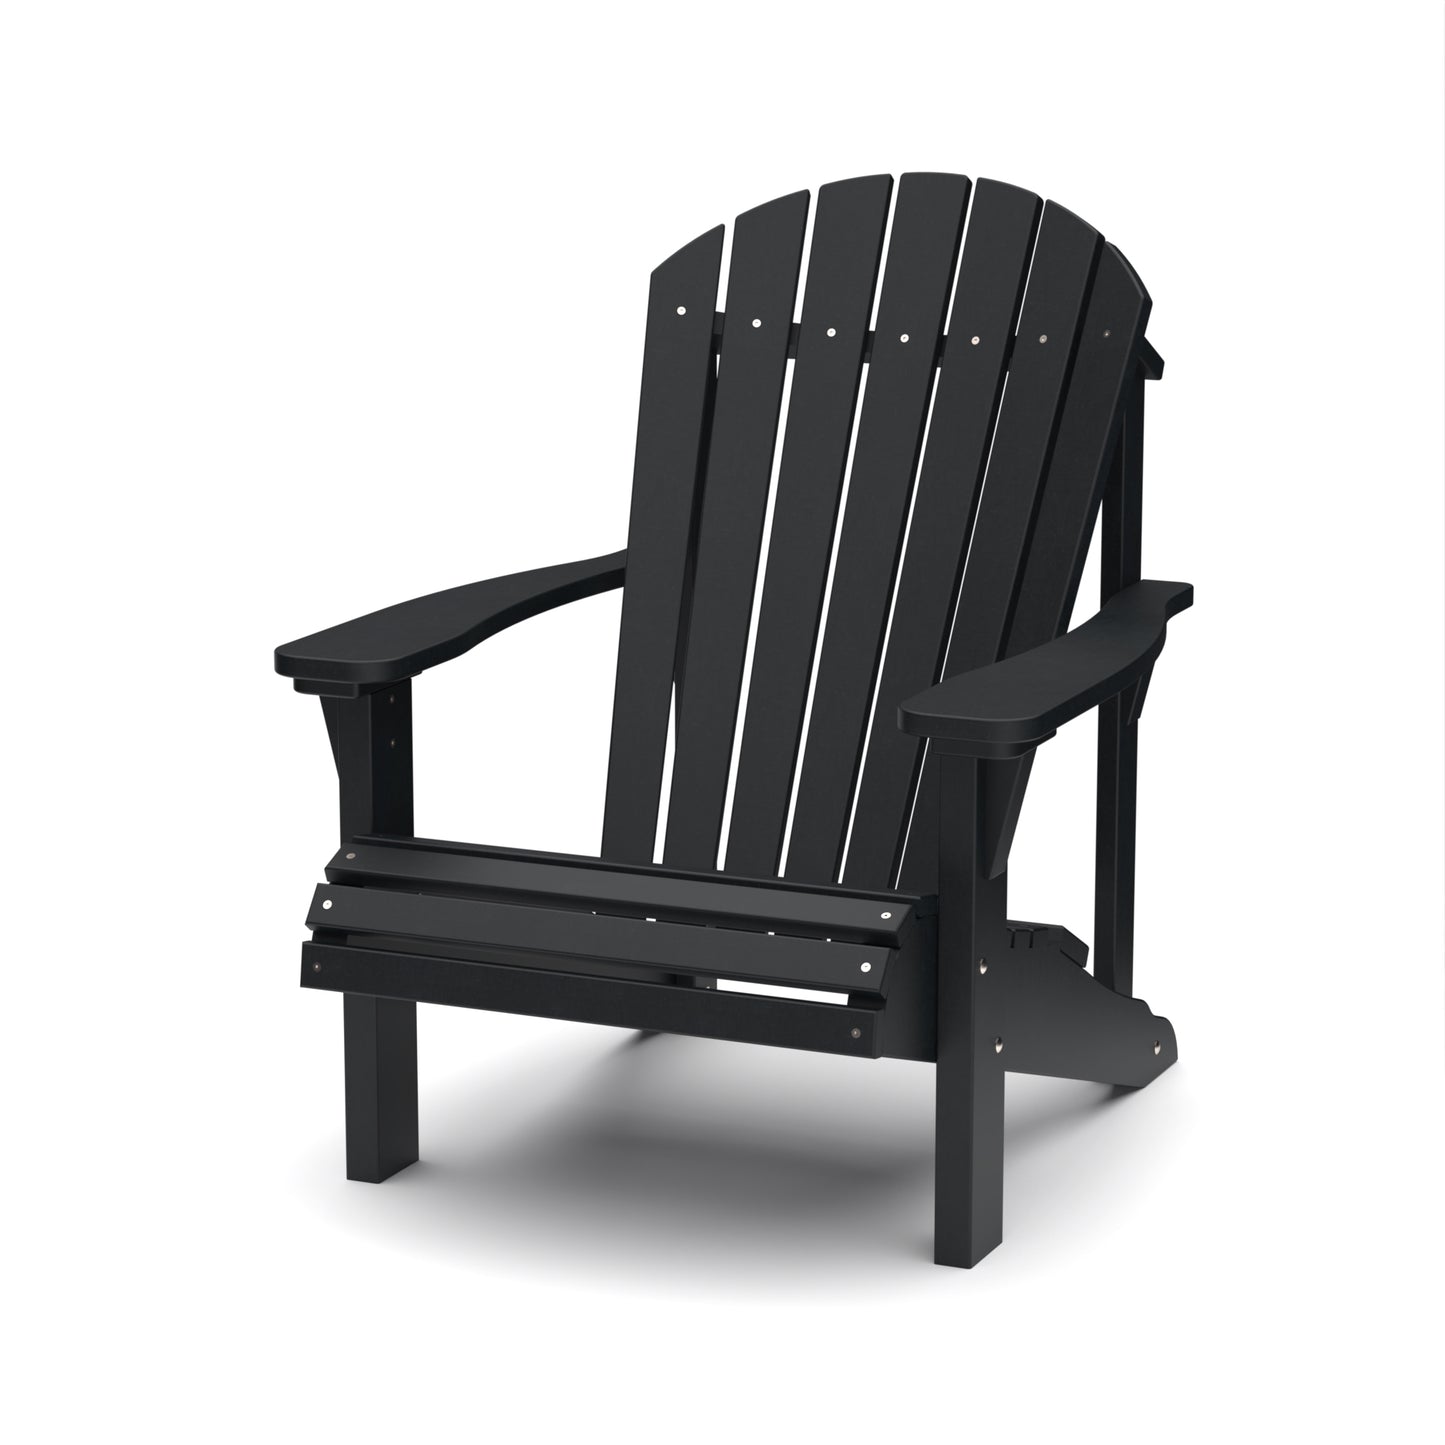 Wildridge LCC-111  Recycled Plastic Heritage Adirondack Chair (QUICK SHIP) - LEAD TIME TO SHIP 3 TO 4 BUSINESS DAYS